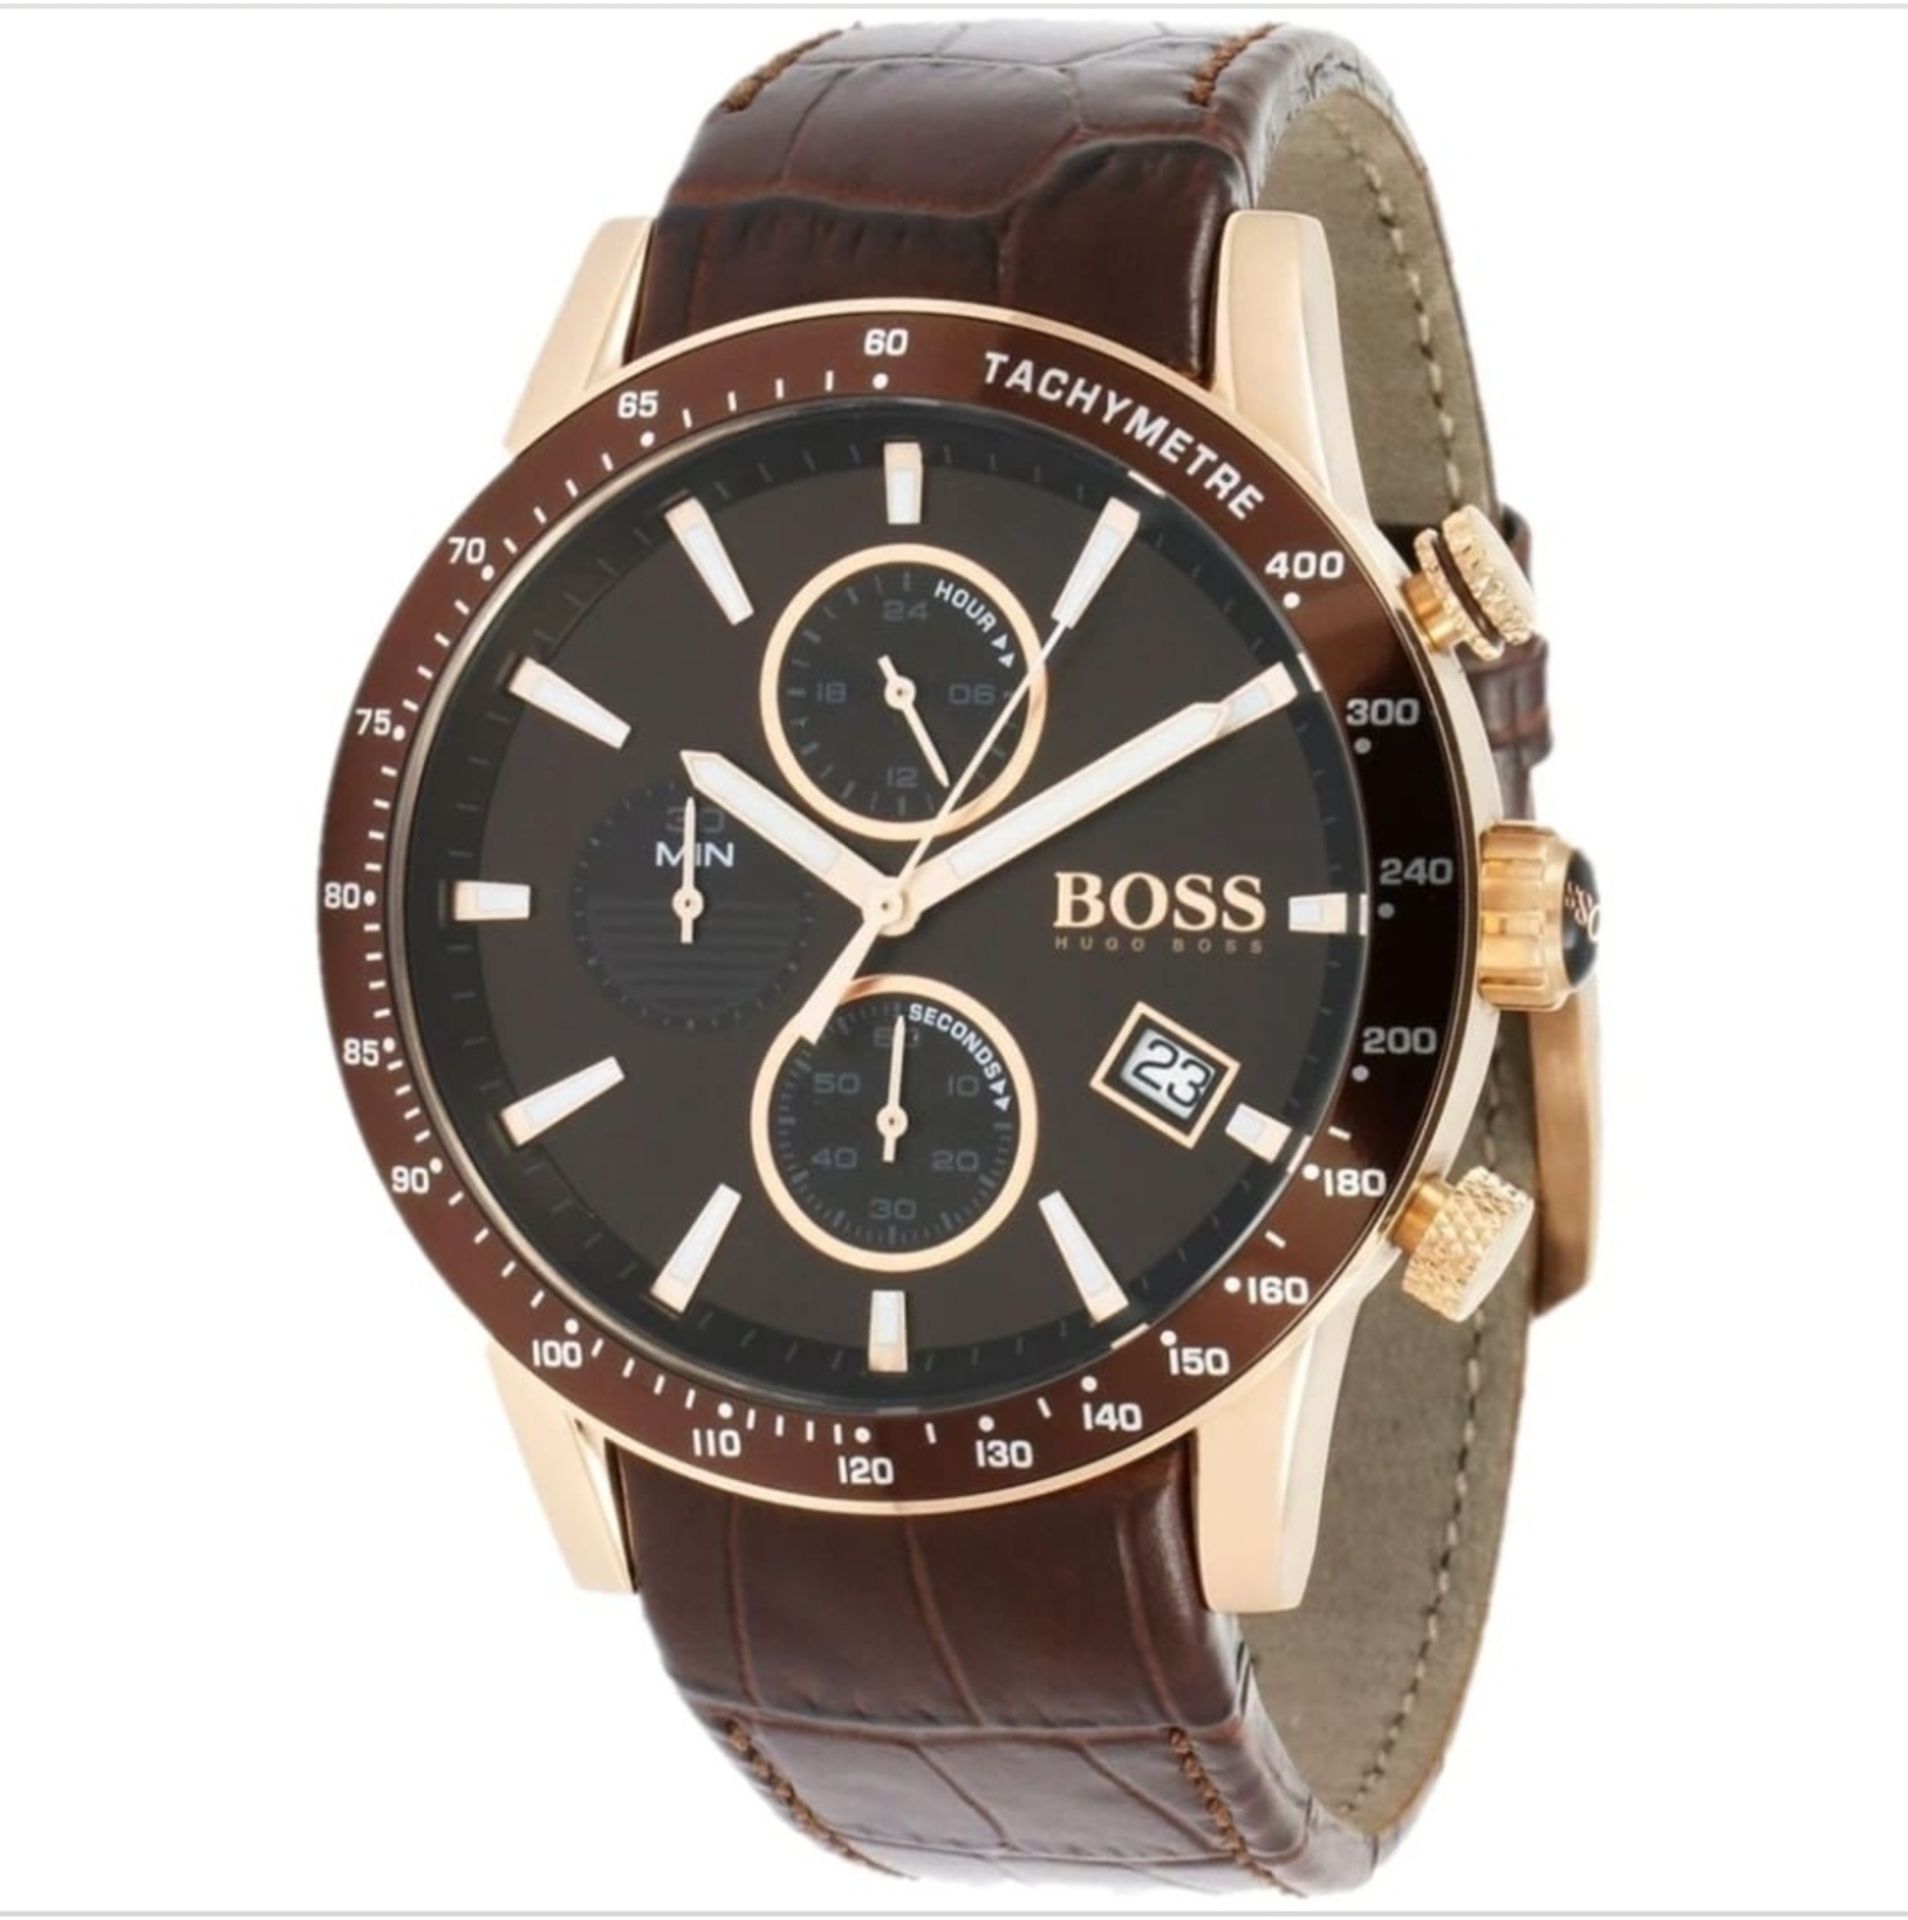 Hugo Boss 1513392 Men's Rafale Brown Leather Strap Chronograph Watch - Image 4 of 7